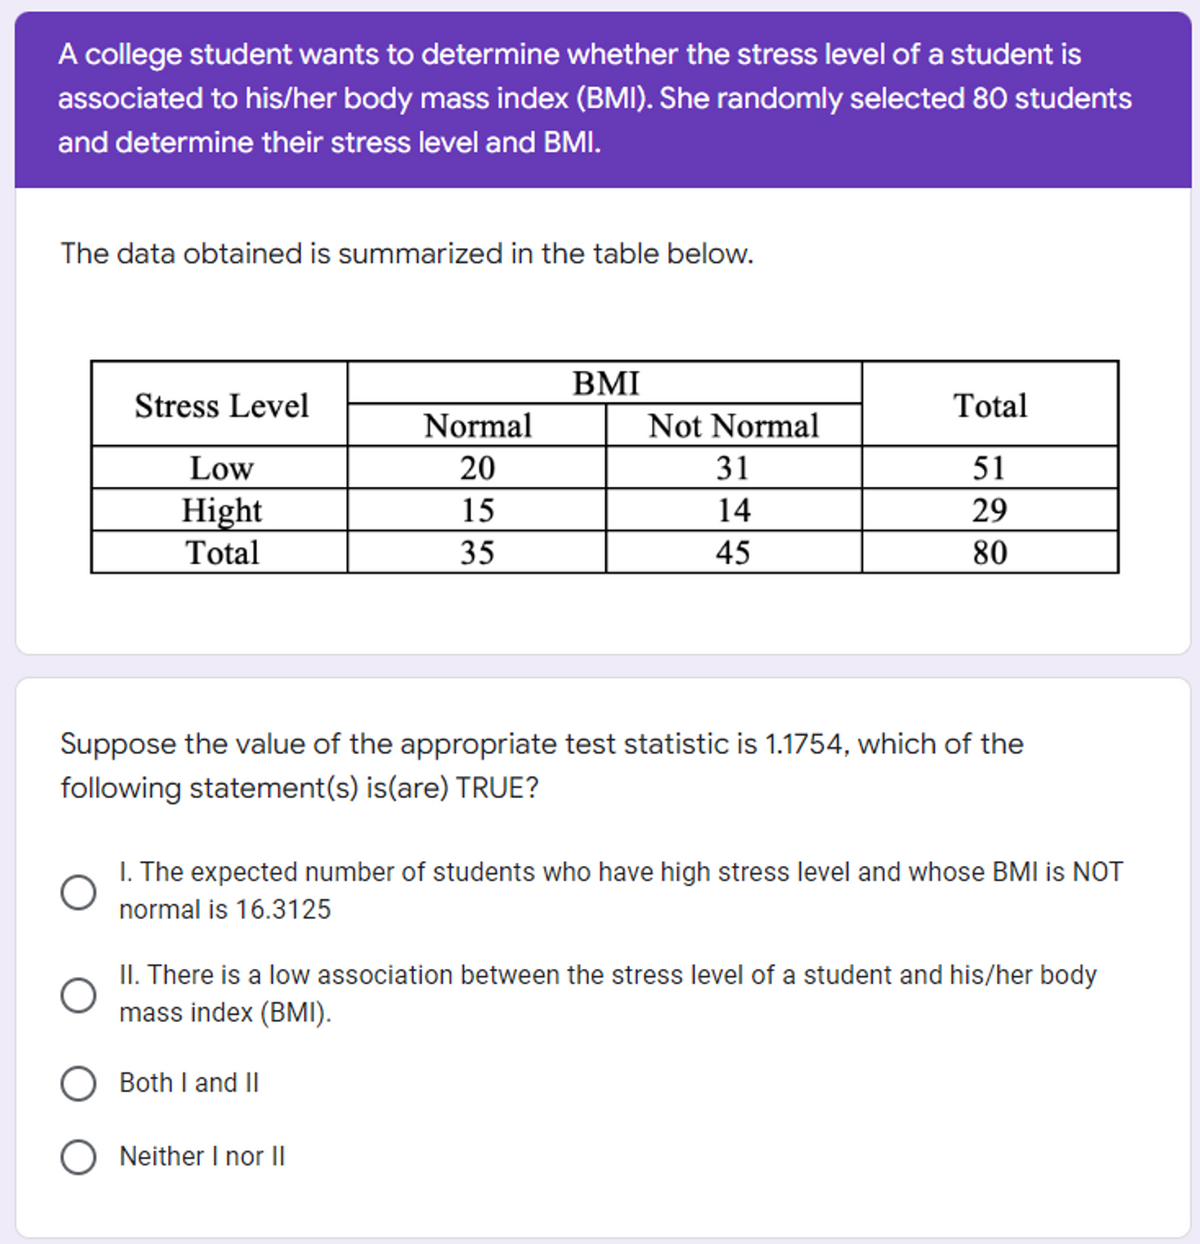 A college student wants to determine whether the stress level of a student is
associated to his/her body mass index (BMI). She randomly selected 80 students
and determine their stress level and BMI.
The data obtained is summarized in the table below.
BMI
Stress Level
Total
Normal
Not Normal
Low
20
31
51
Hight
Total
15
14
29
35
45
80
Suppose the value of the appropriate test statistic is 1.1754, which of the
following statement(s) is(are) TRUE?
I. The expected number of students who have high stress level and whose BMI is NOT
normal is 16.3125
II. There is a low association between the stress level of a student and his/her body
mass index (BMI).
Both I and II
O Neither I nor |I
